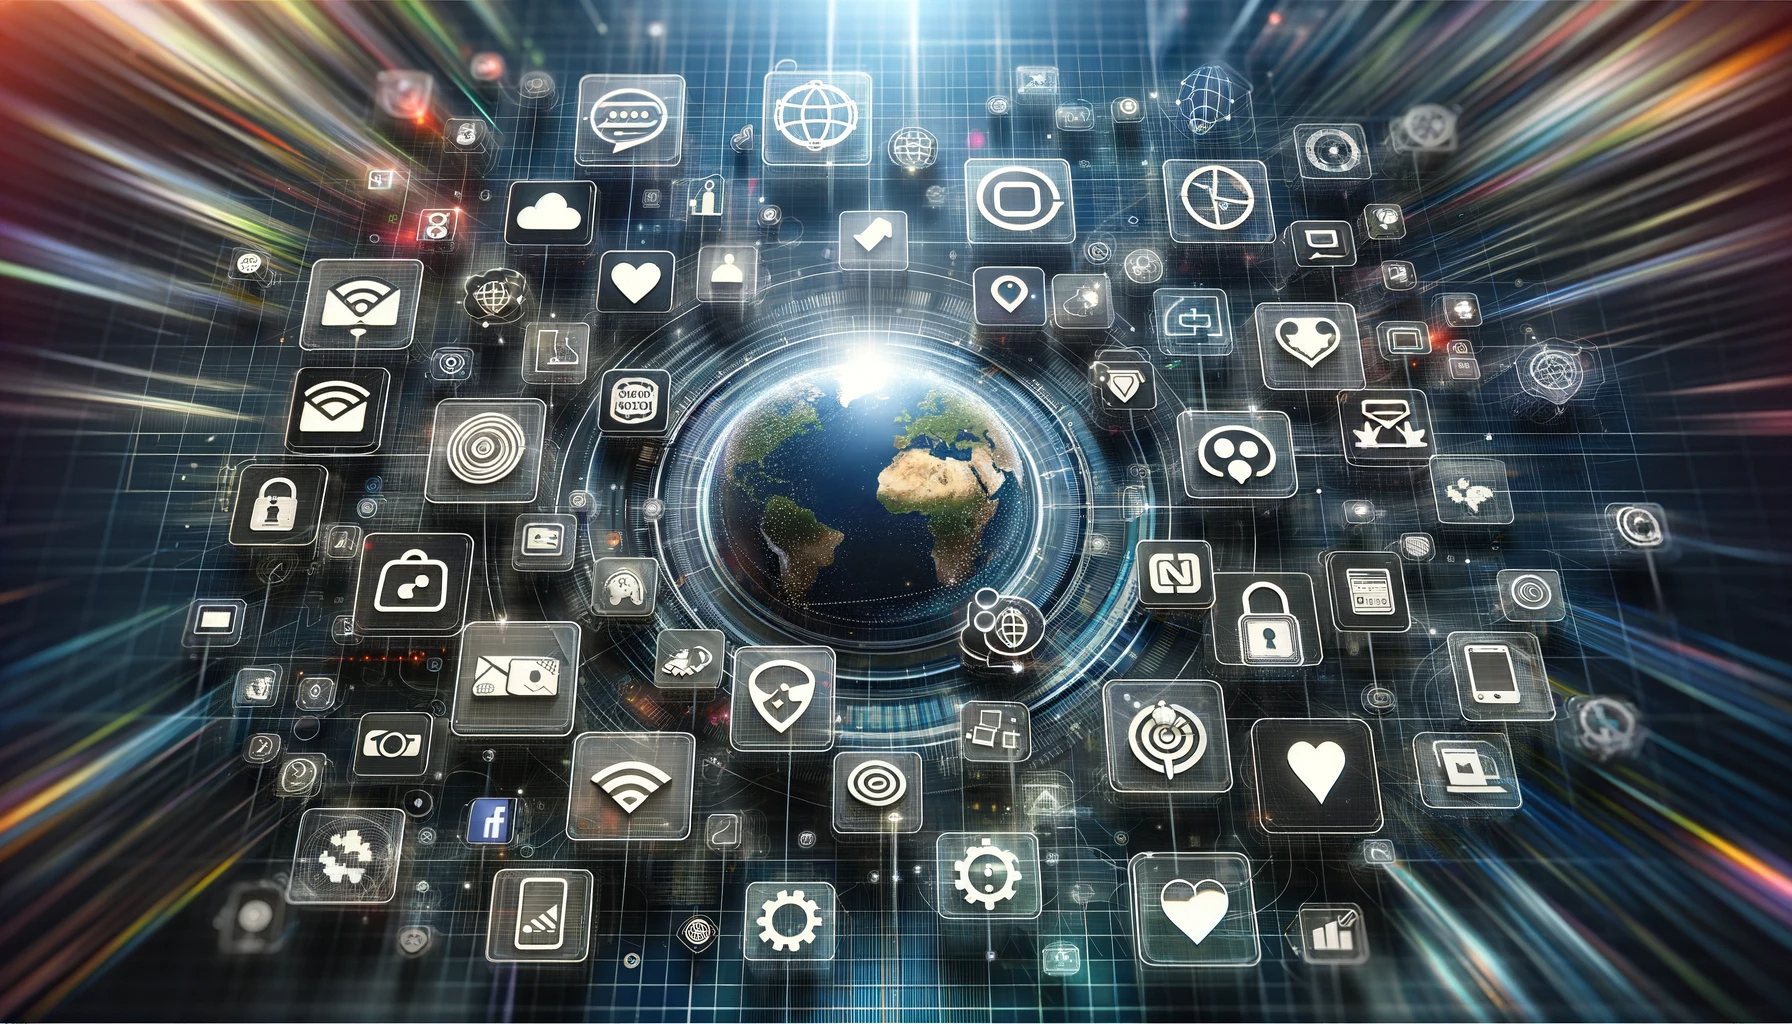 A conceptual image representing the diverse features of mobile app development. The image includes various app icons floating in a digital space, each